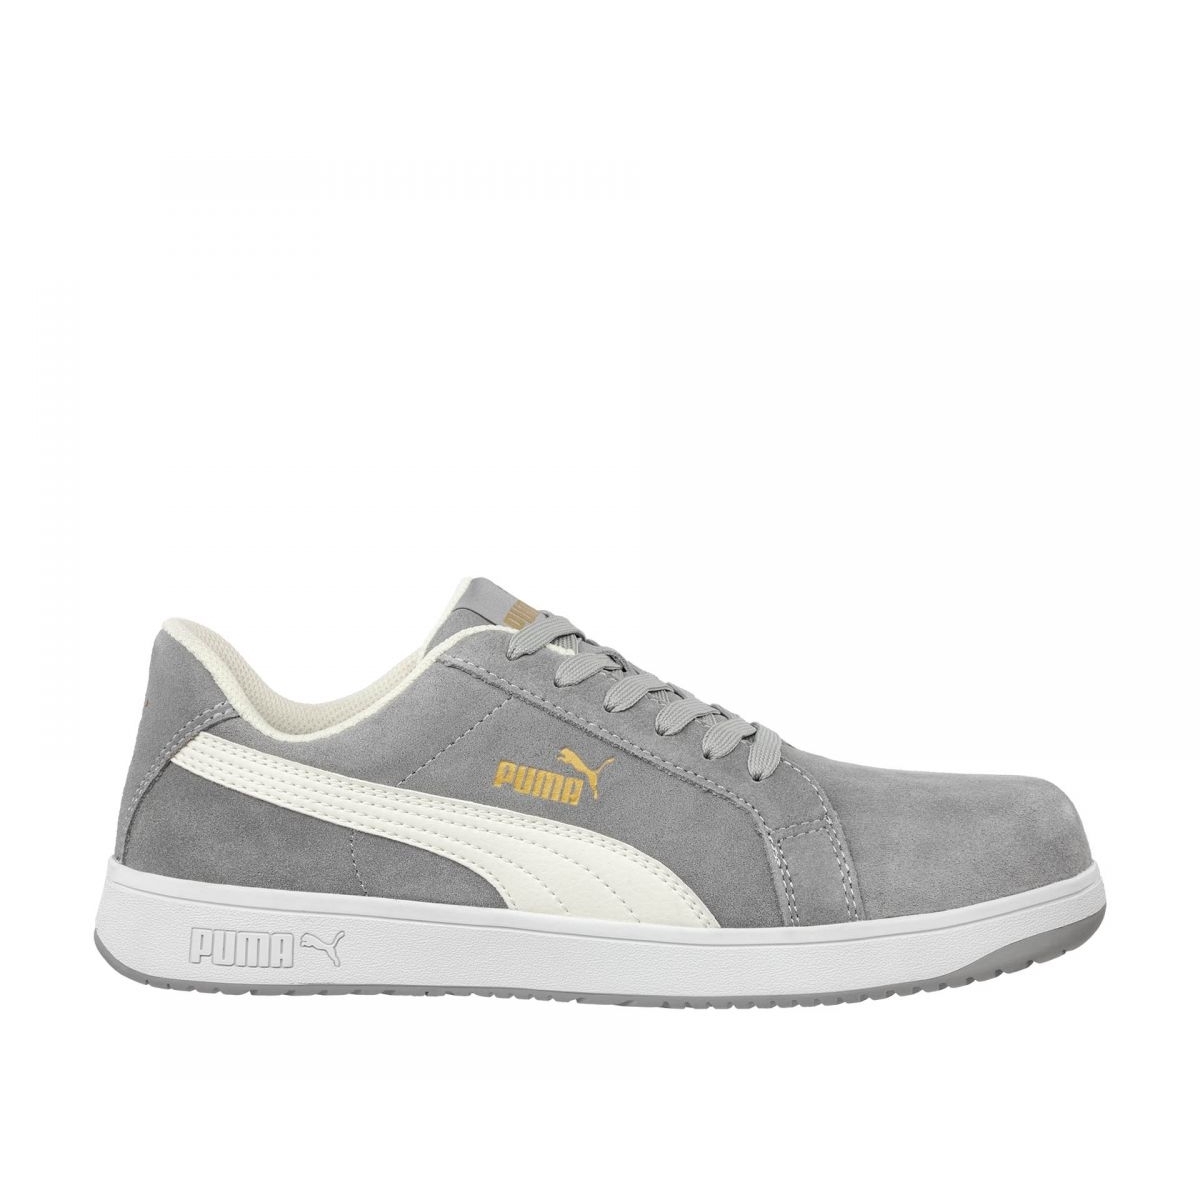 PUMA Safety Men's Iconic Low Composite Toe SD Work Shoes Grey Suede - 640035 Grey - Grey, 11.5